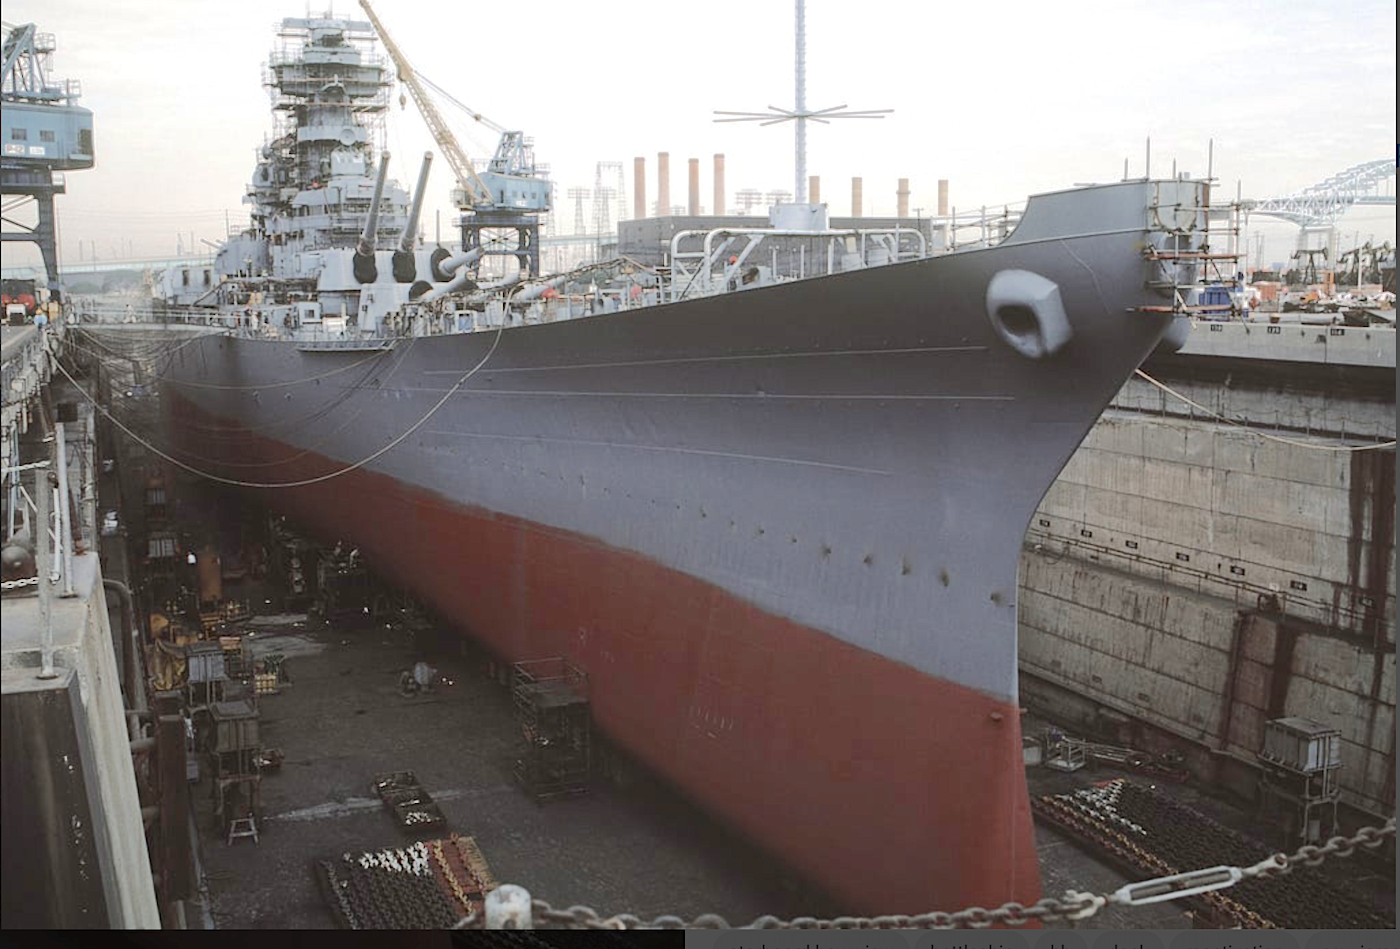 Battleship New Jersey going in for repairs, but it’s still short of cash to complete the work